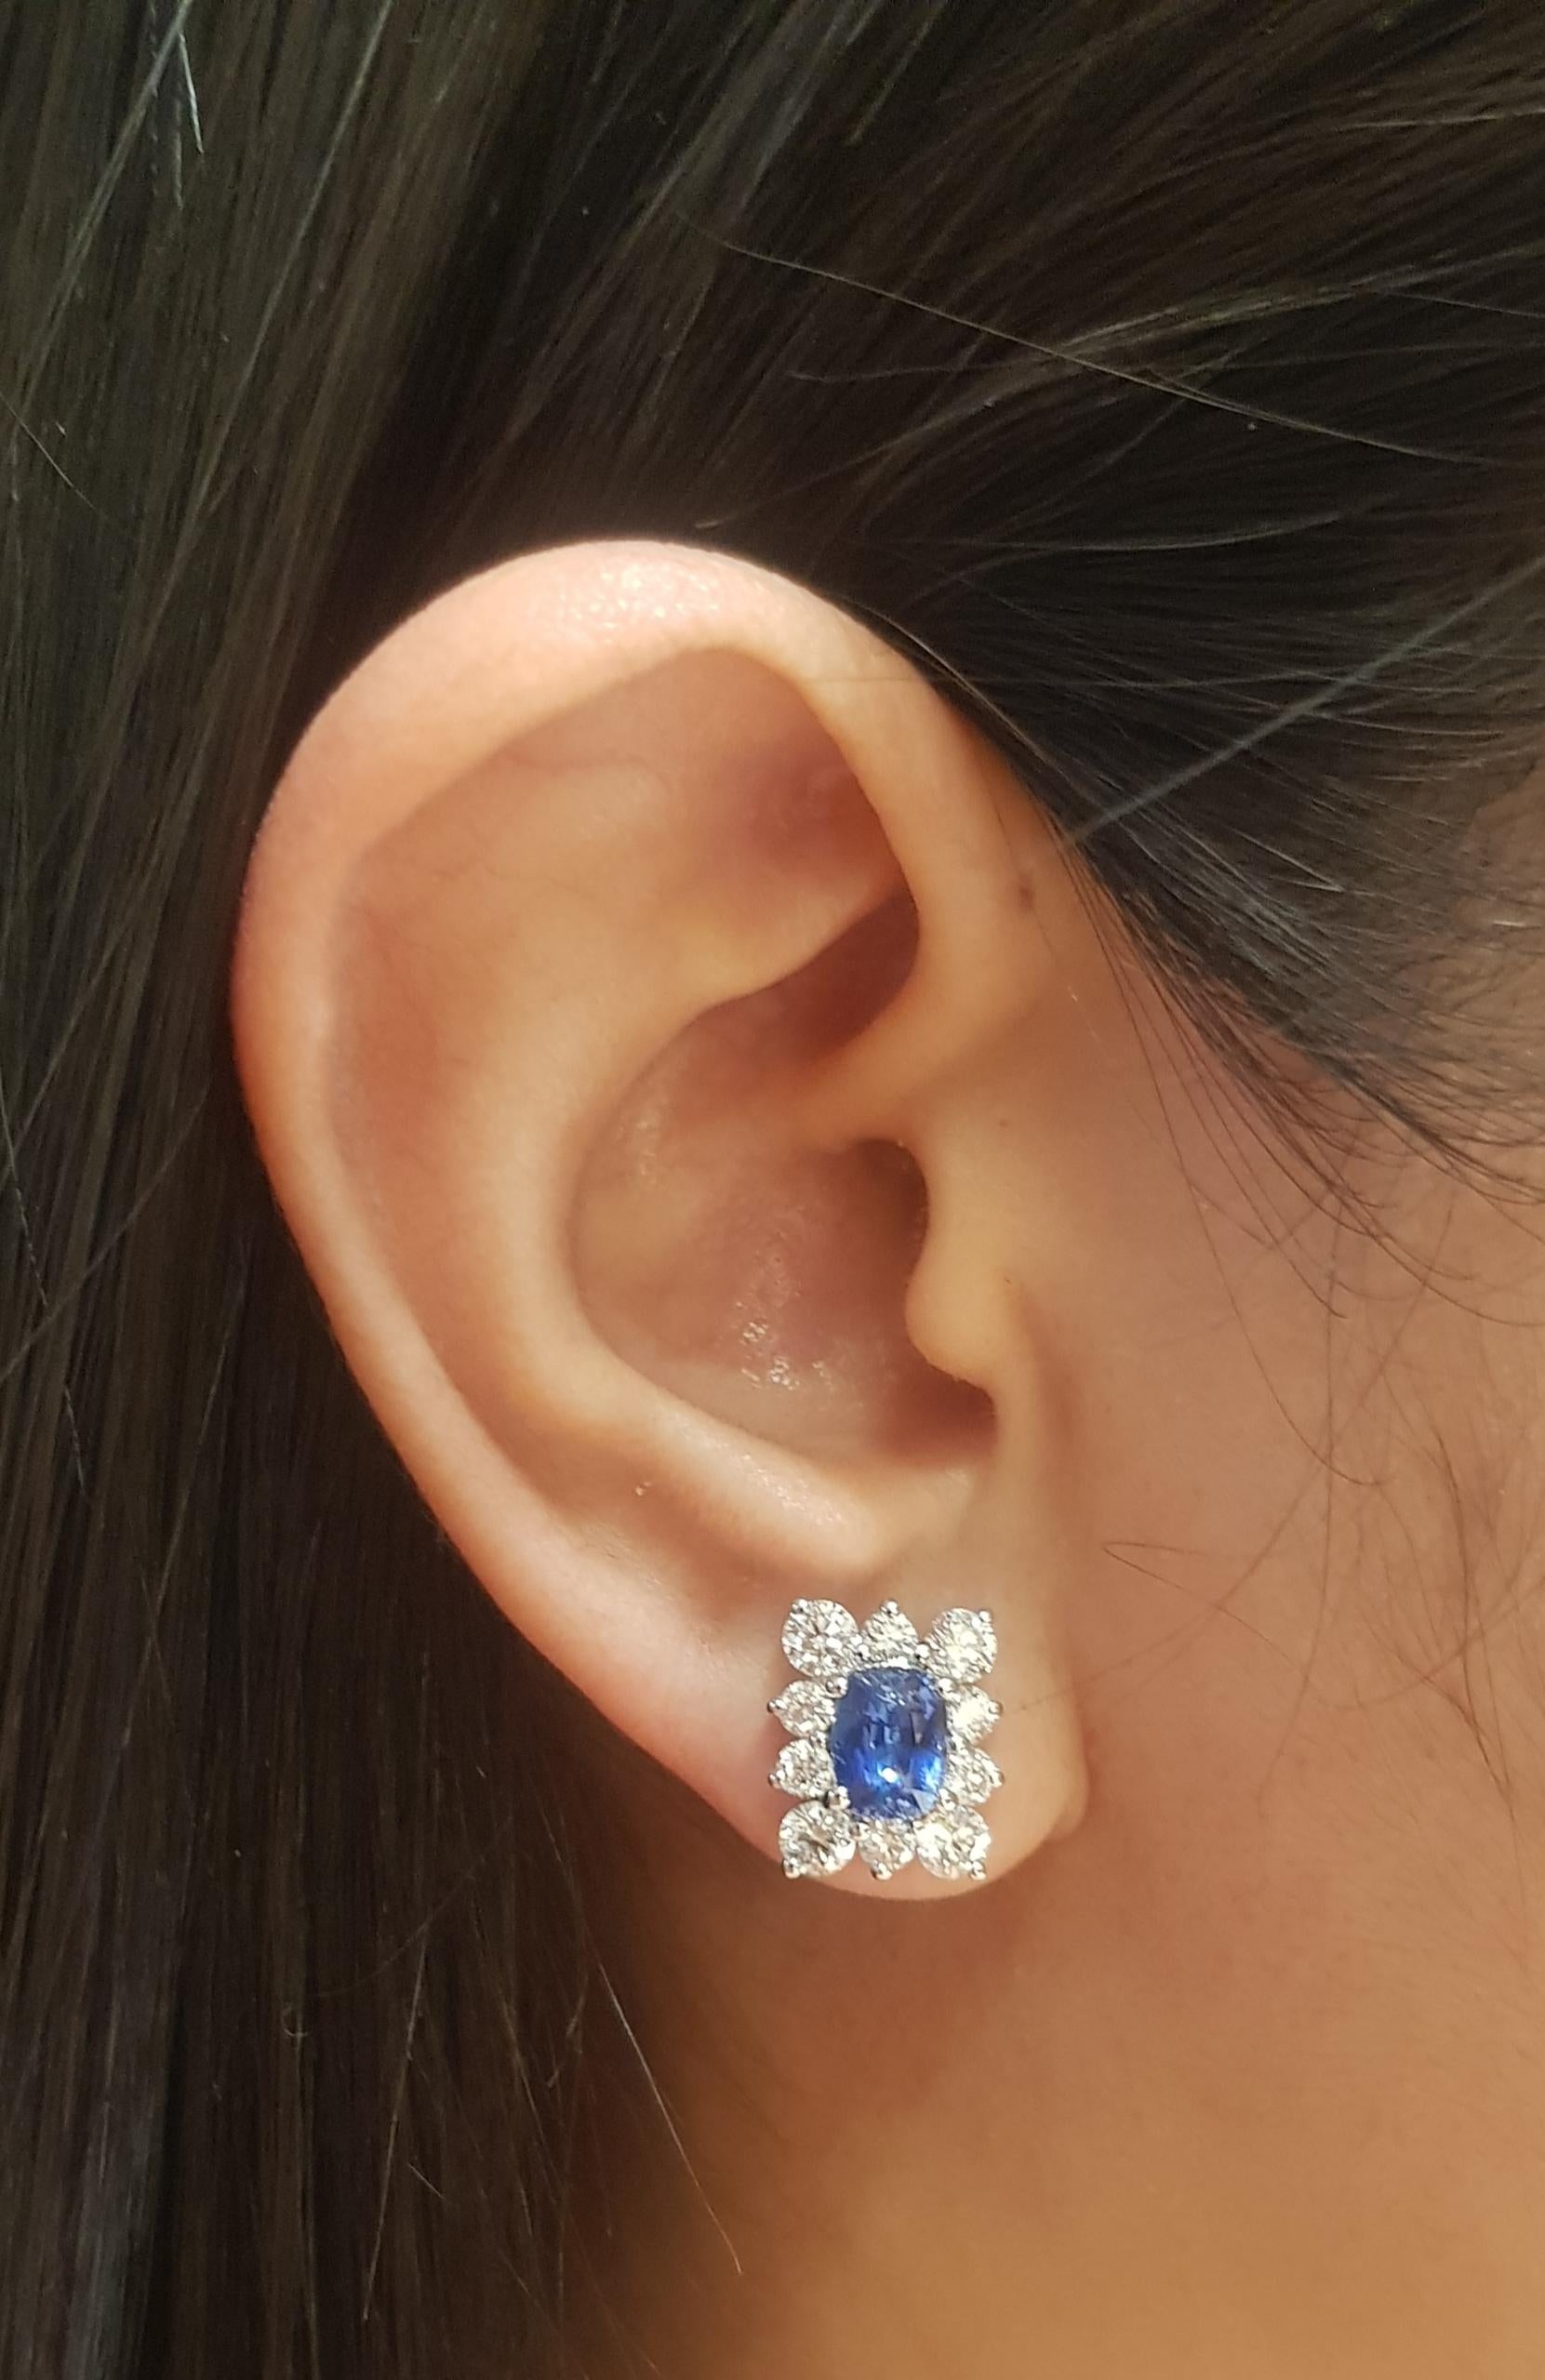 Blue Sapphire 2.18 carats with Diamond 1.83 carats Earrings set in 18K White Gold Settings

Width: 1.1 cm 
Length: 1.3 cm
Total Weight: 5.41 grams

